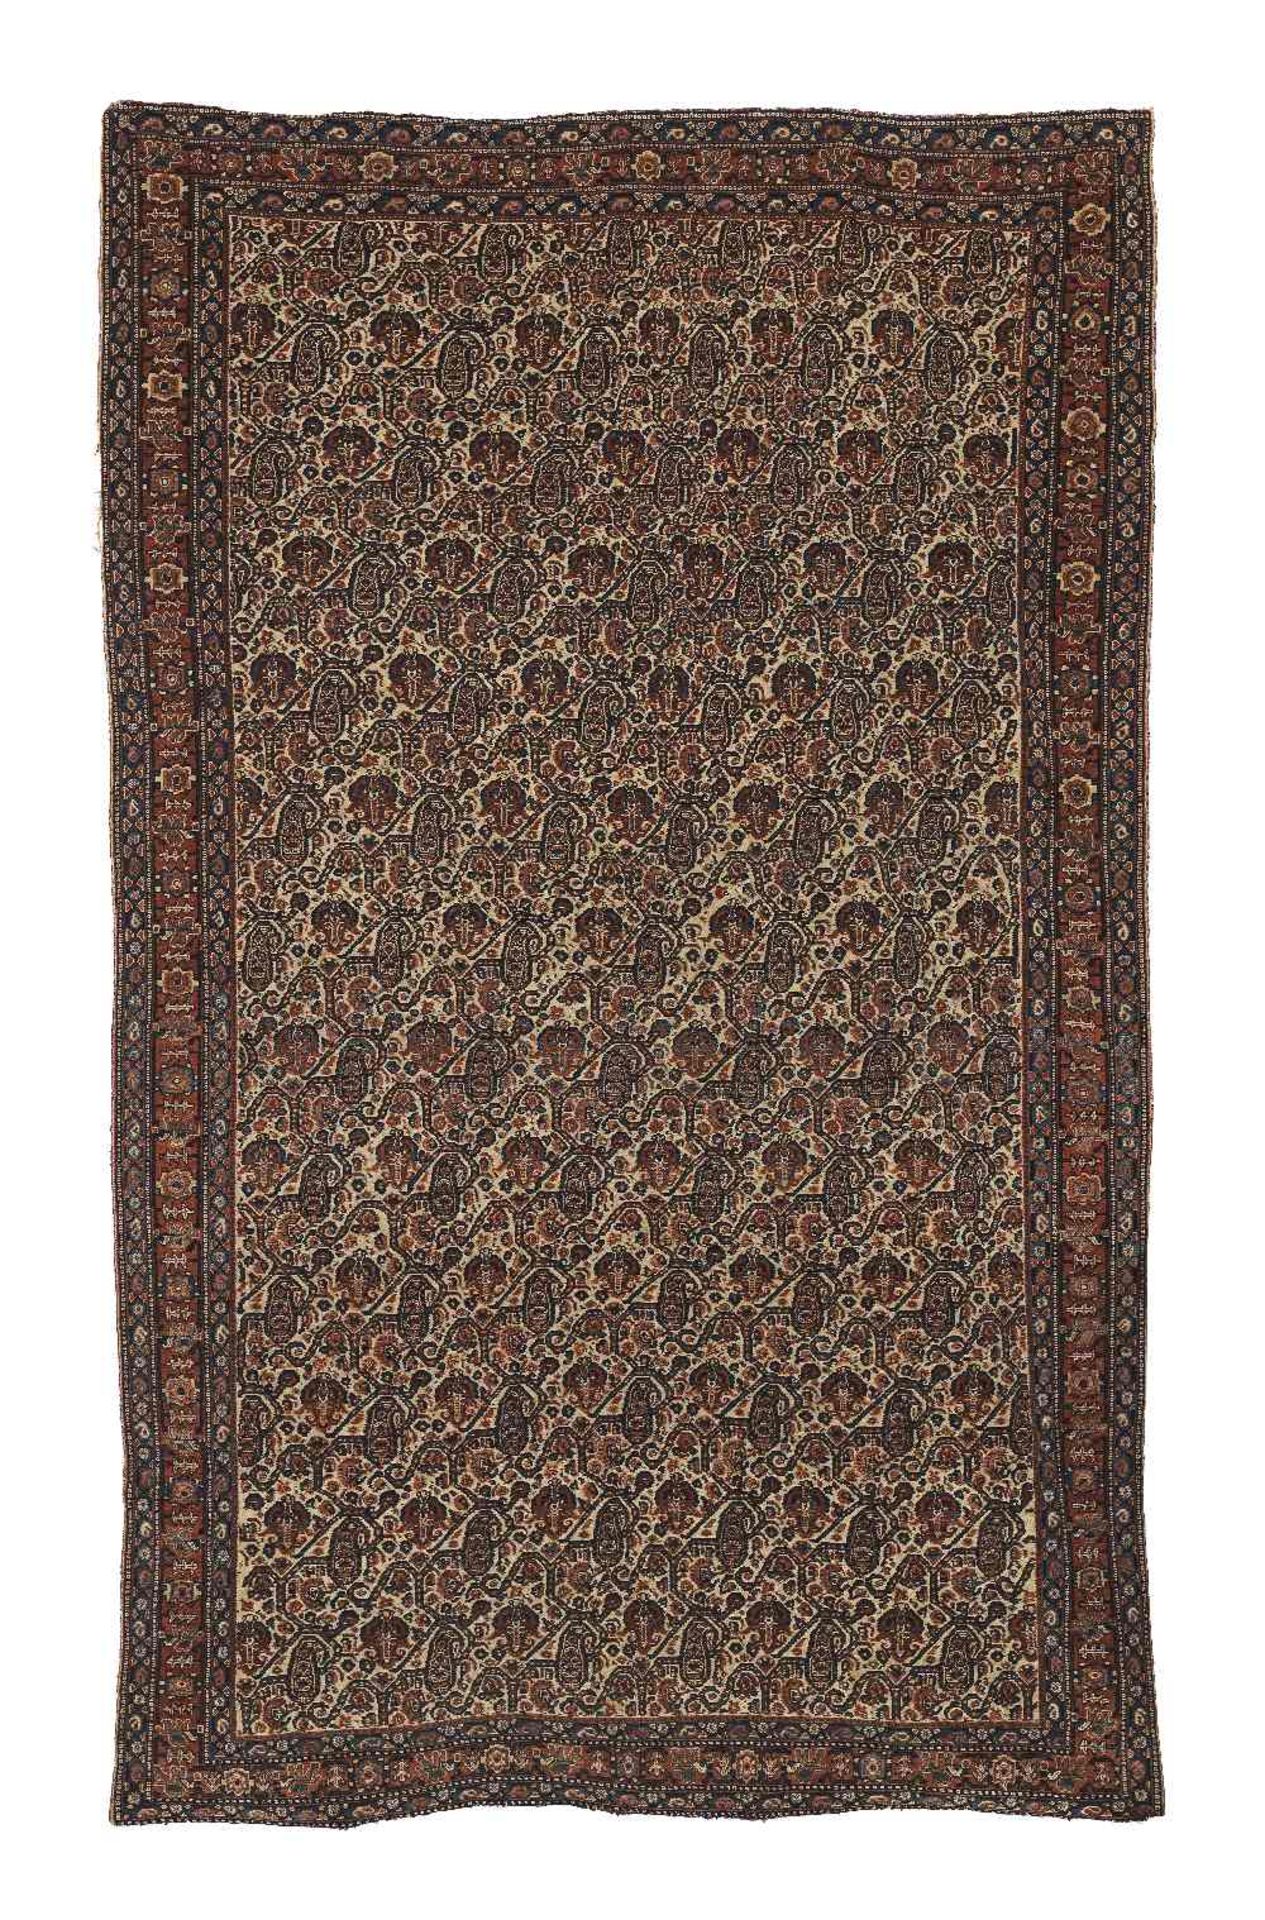 A Senneh carpet North-West Persia, early 20th century, 222cm x 139cm